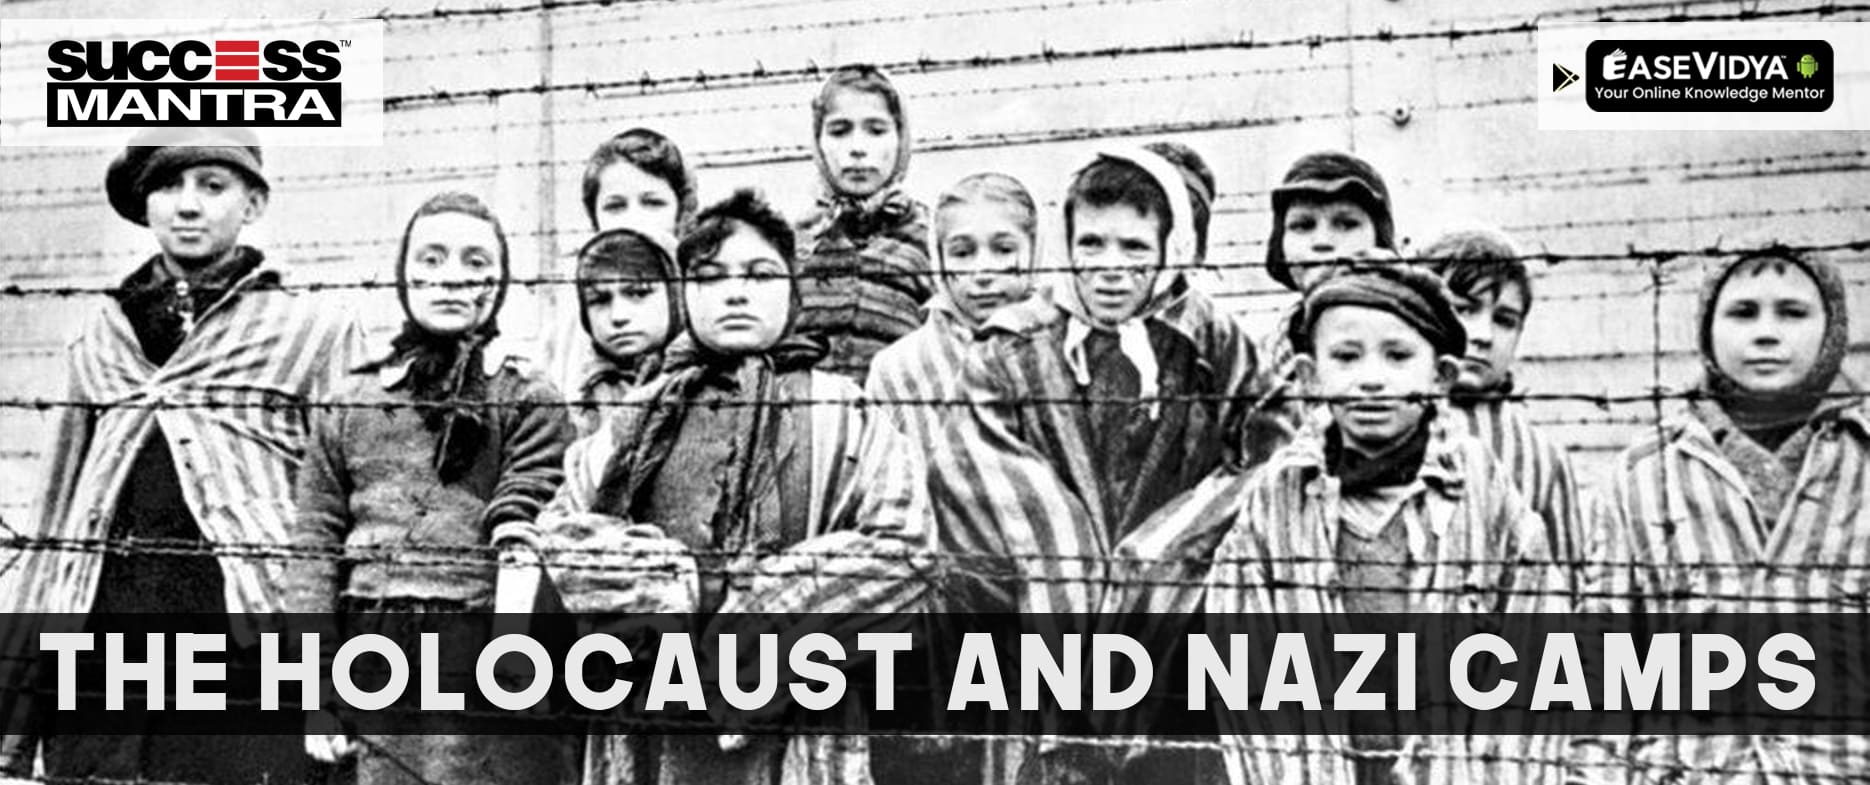 The Holocaust and Nazi Camps: A Dark Chapter in Human History and Its Ongoing Impact